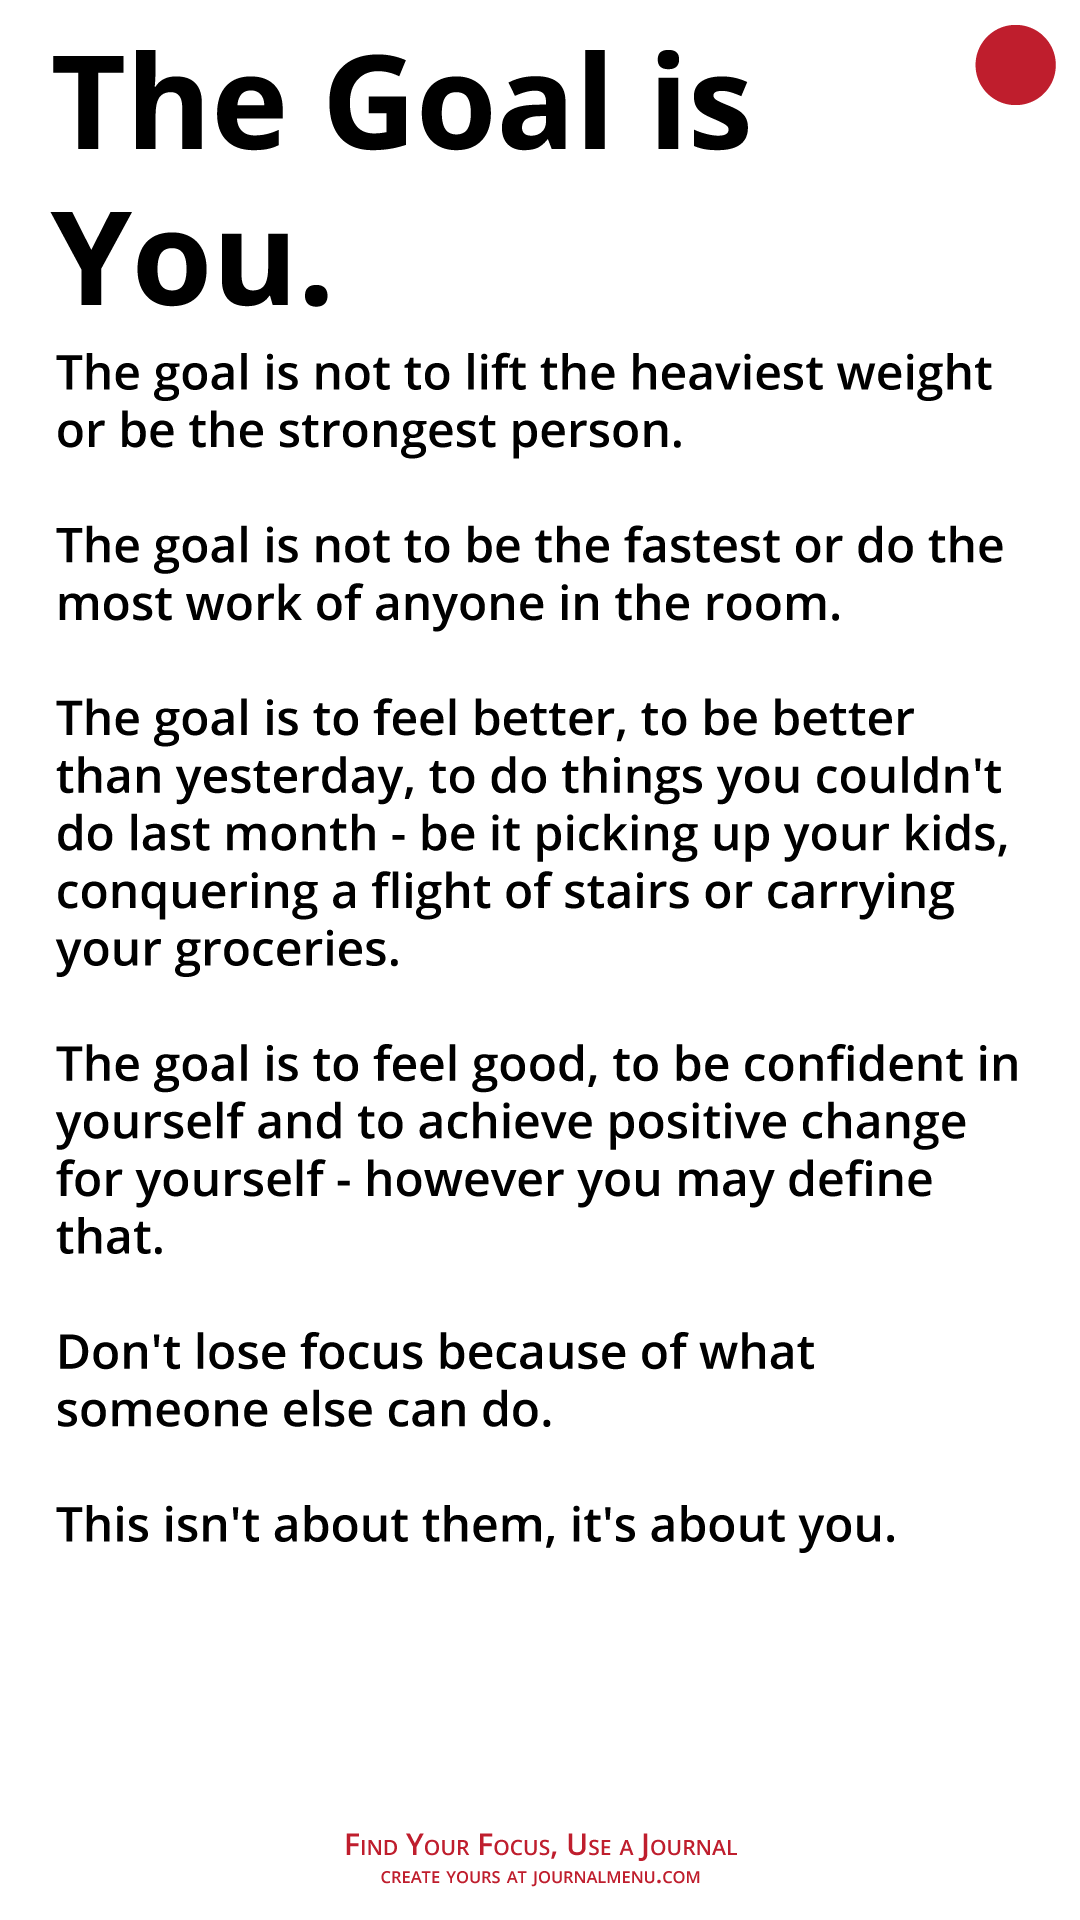 Image showing an essay about the goal being about your own progress